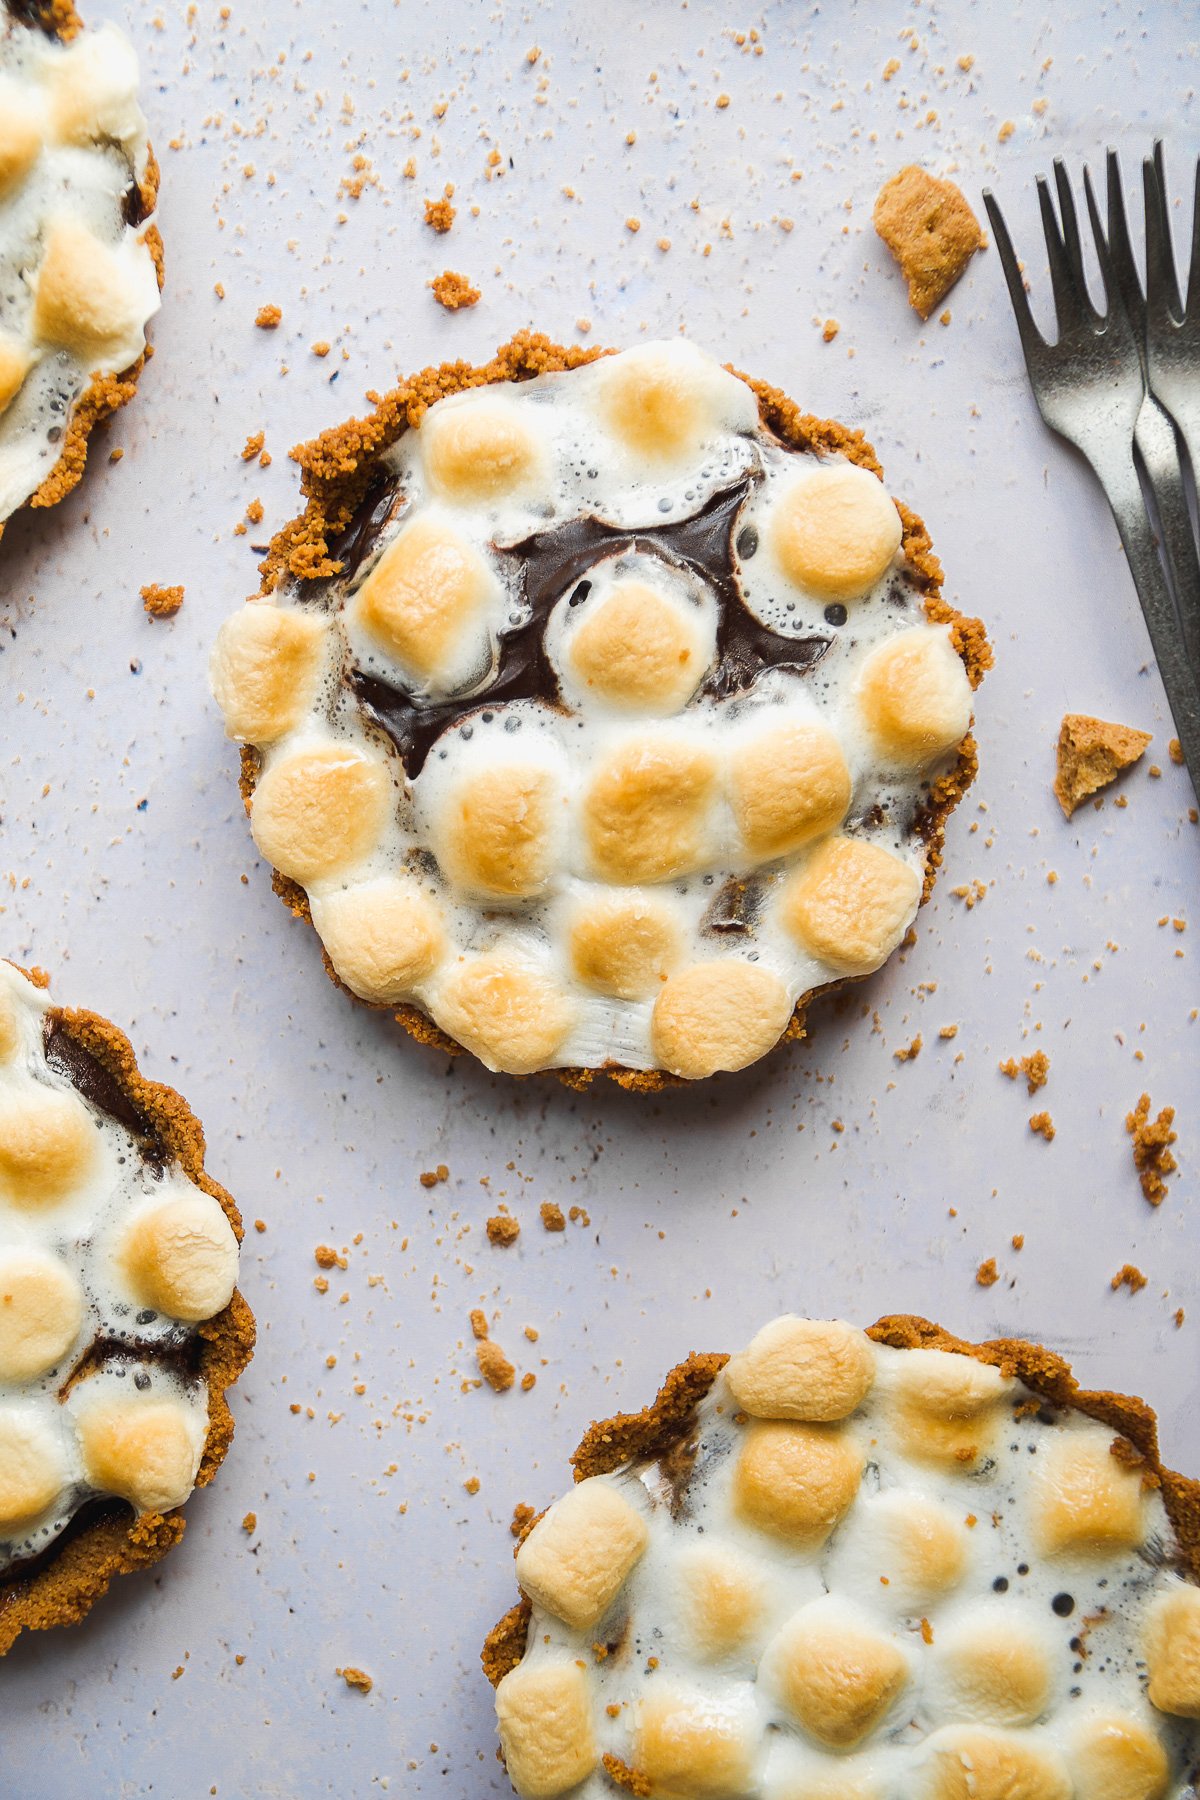 Miniature s'more pie on a light surface with toasted marshmallows on top.